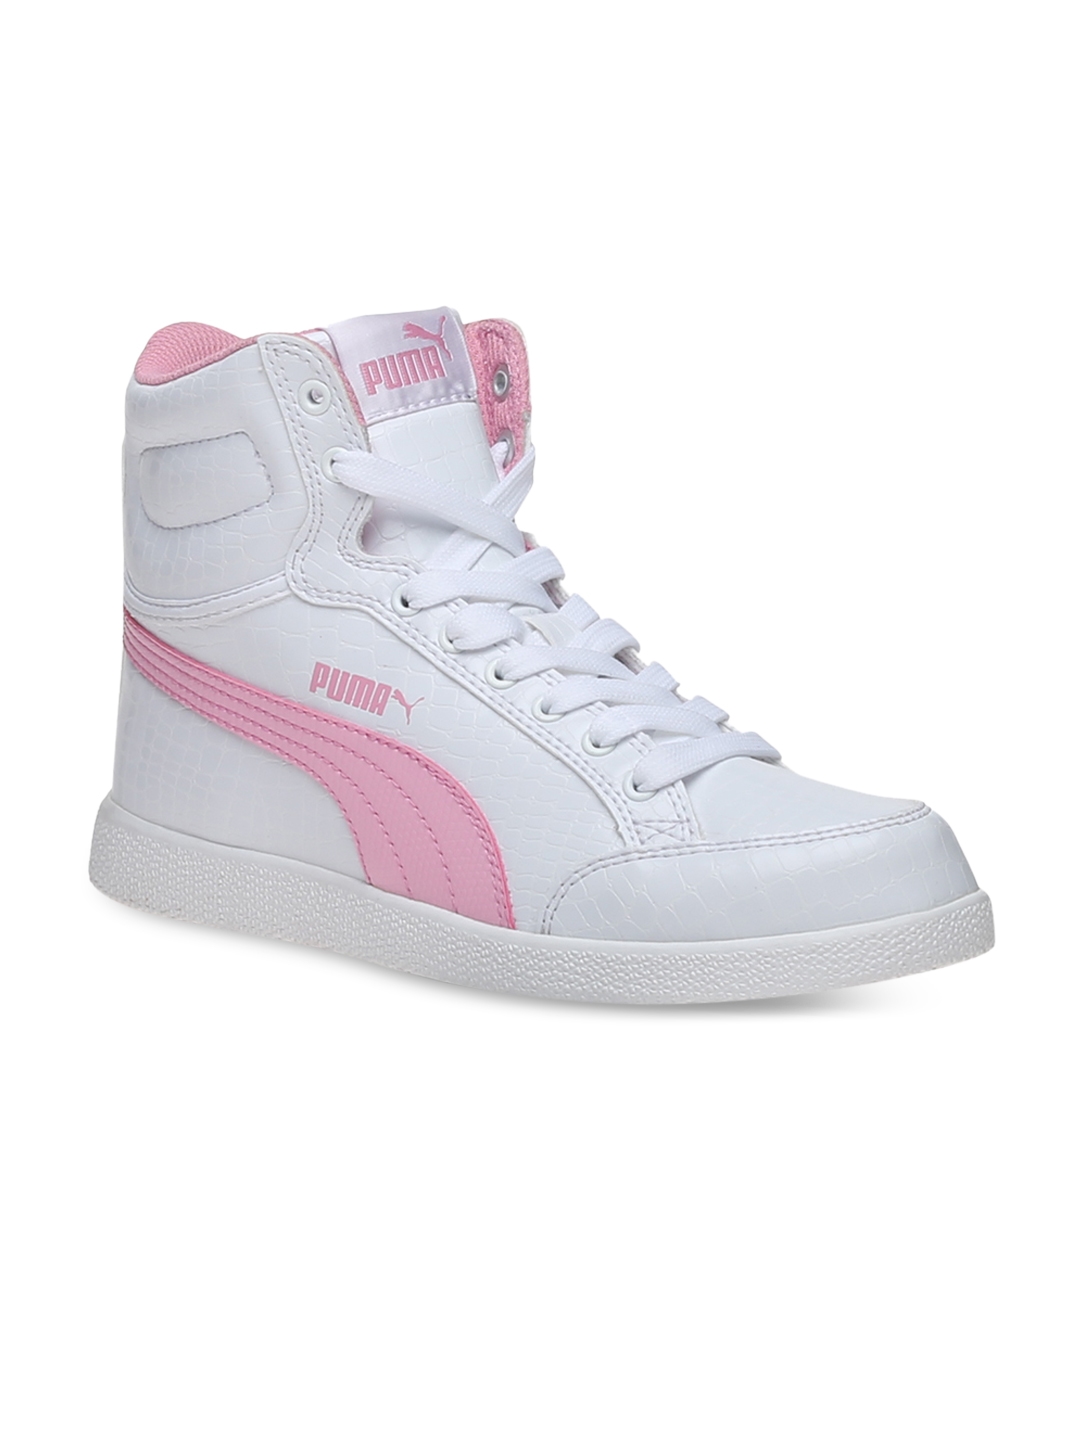 puma sneakers for girls high tops